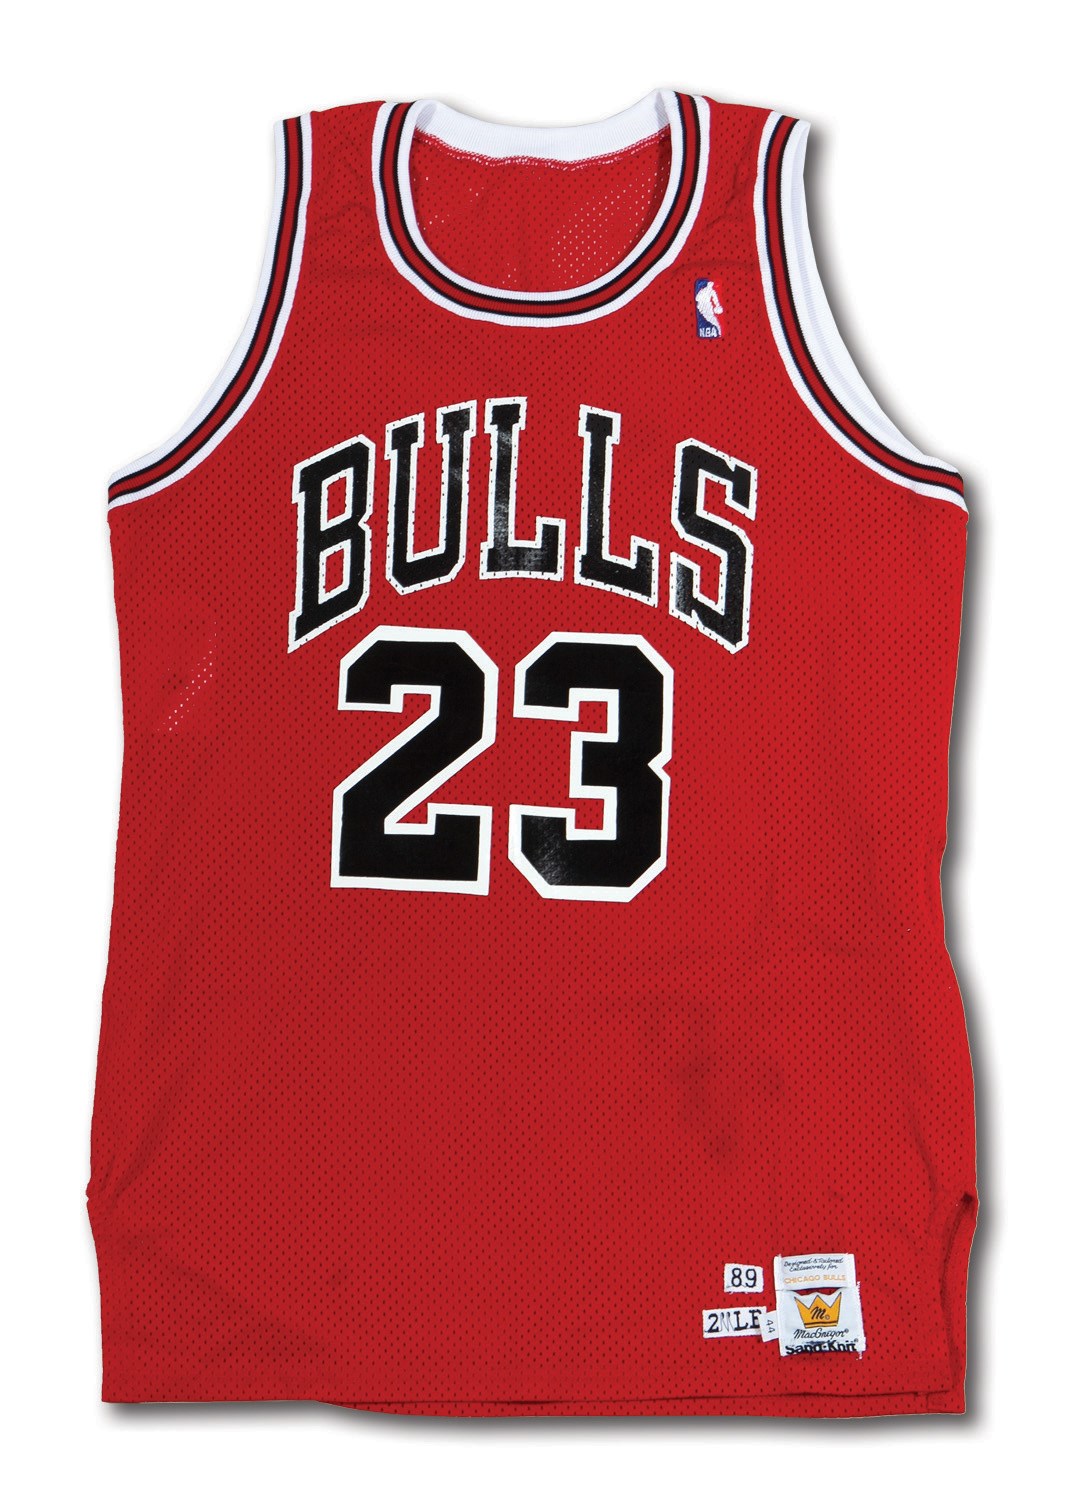 Michael Jordan Game-Worn Jersey For Sale, Expected To Sell For